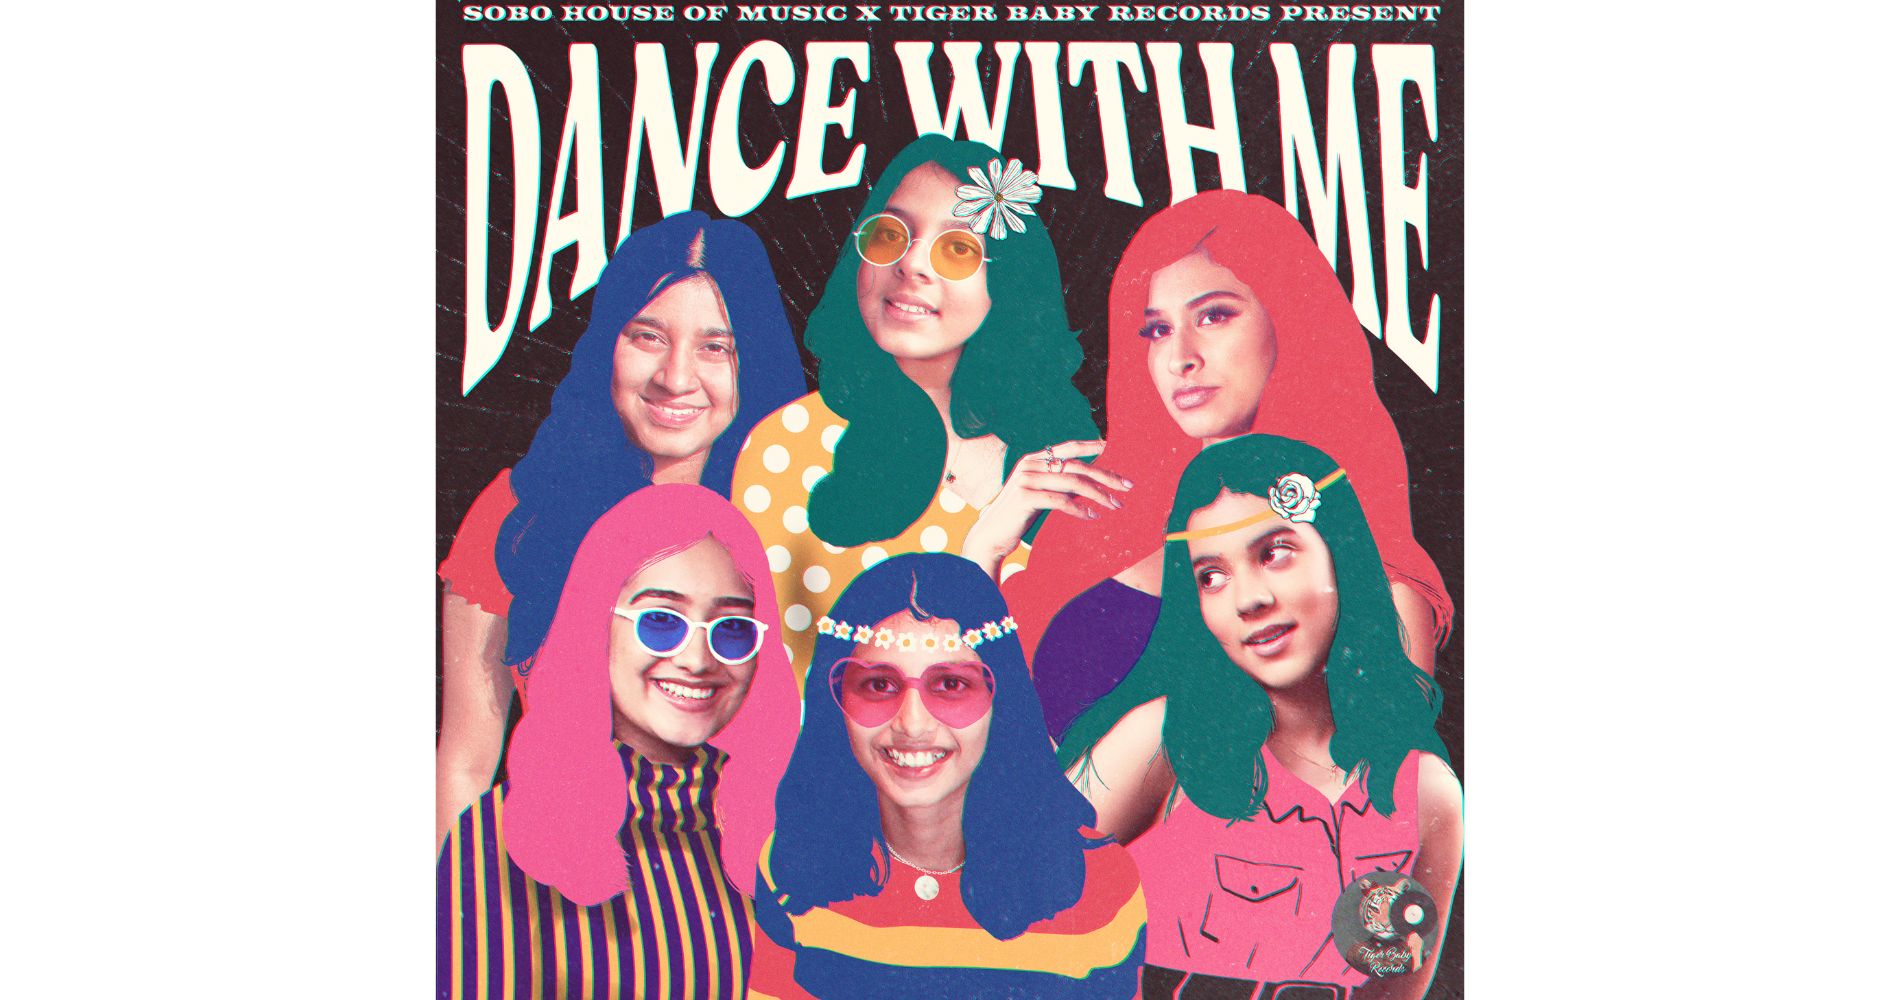 Tiger Baby Records And SoBo House Of Music Join Forces For 'Dance With Me'—A Dancefloor Sensation